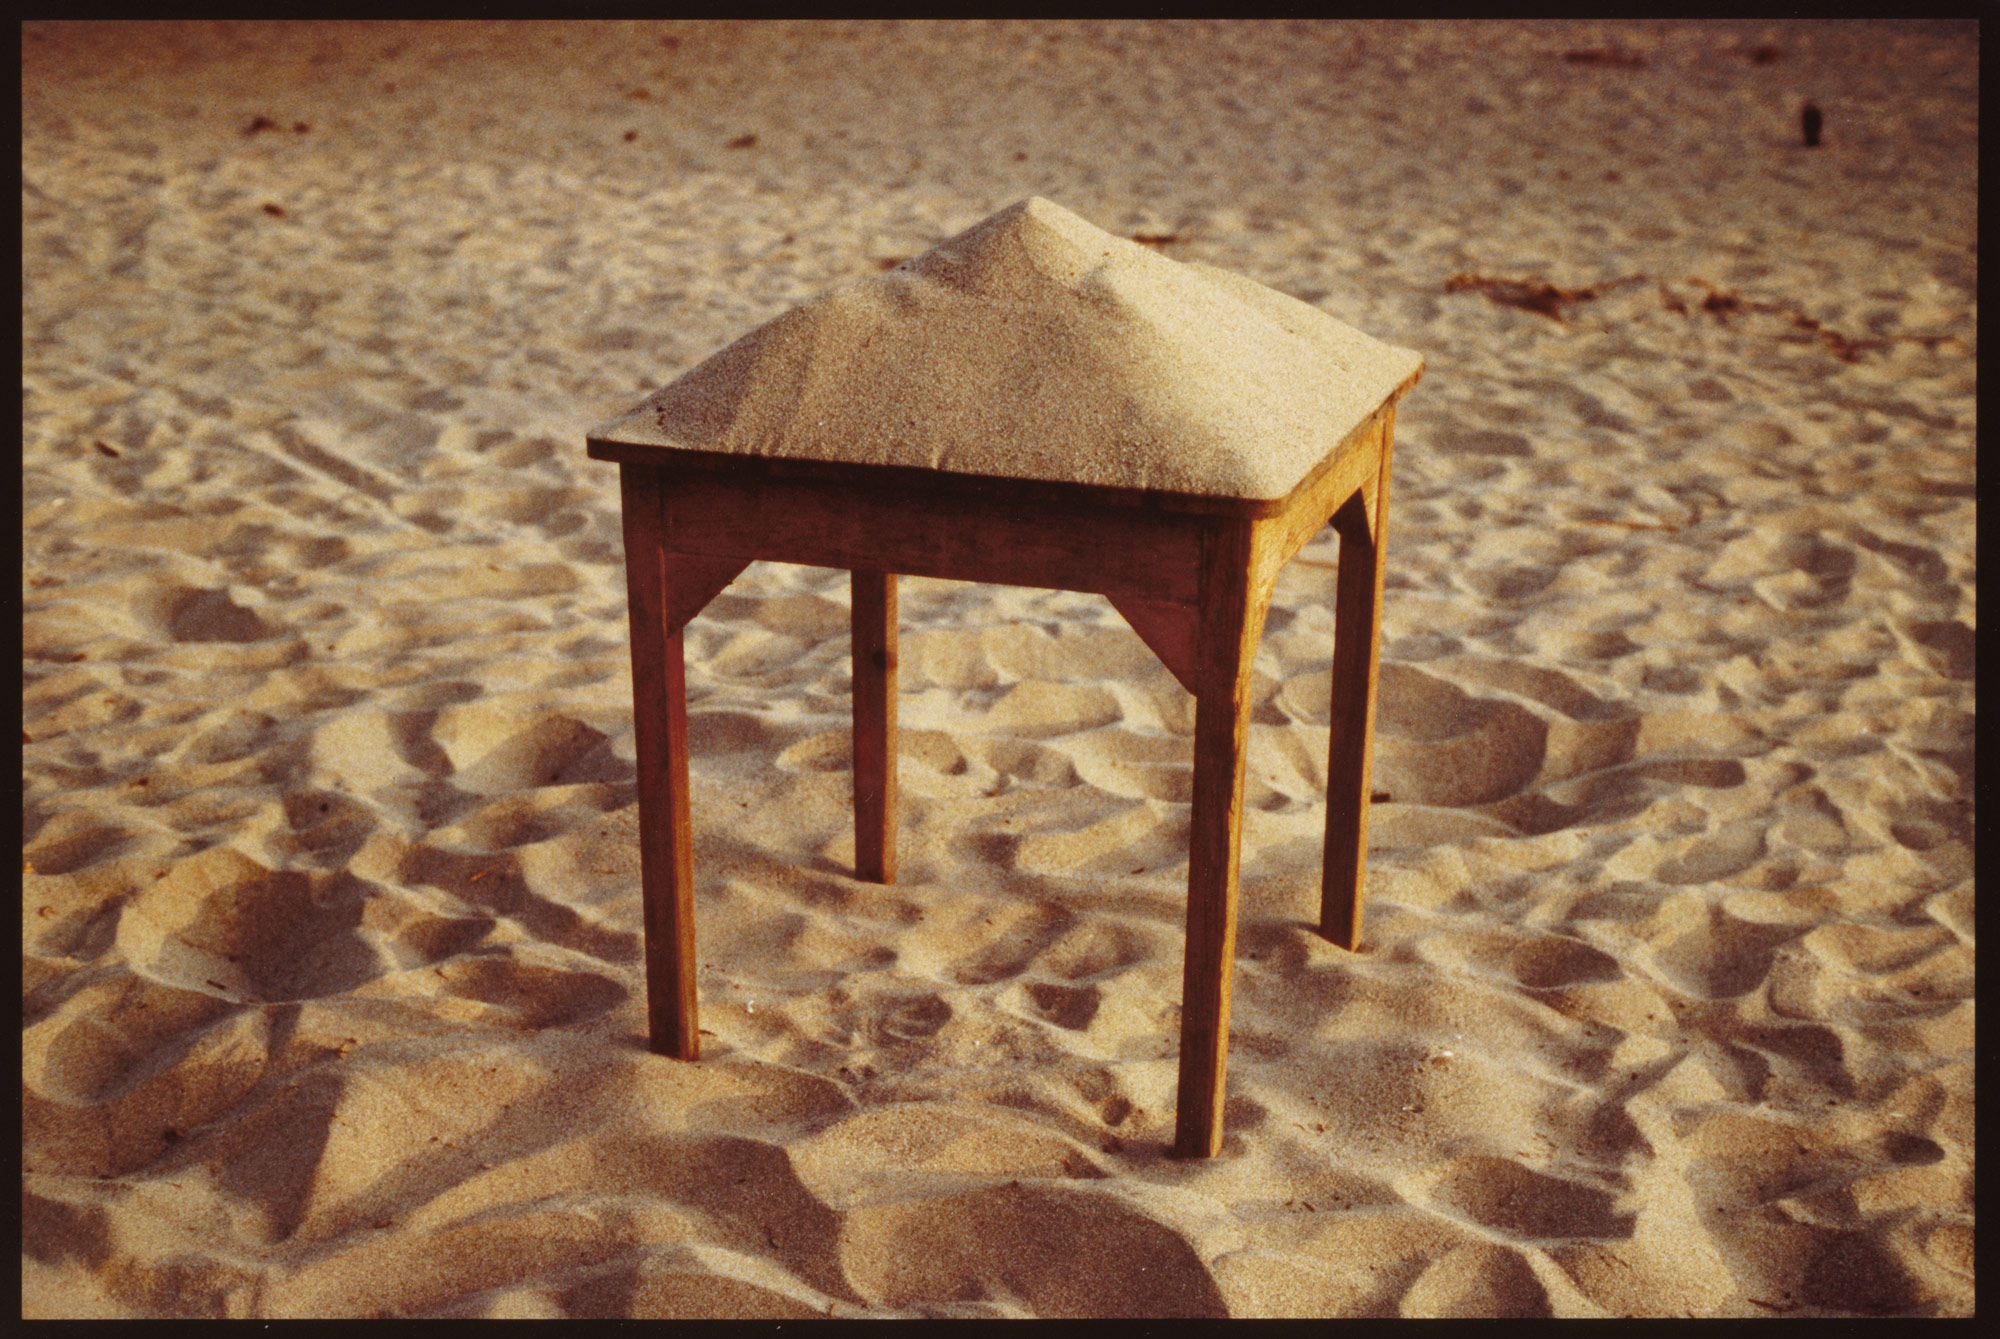 Working Title/Artist: Sand on Table Department: Photographs Culture/Period/Location: HB/TOA Date Code: 11 Working Date: 1992-93 photography by mma 2000, transparency #4 scanned and retouched by film and media (jn) 7_30_04